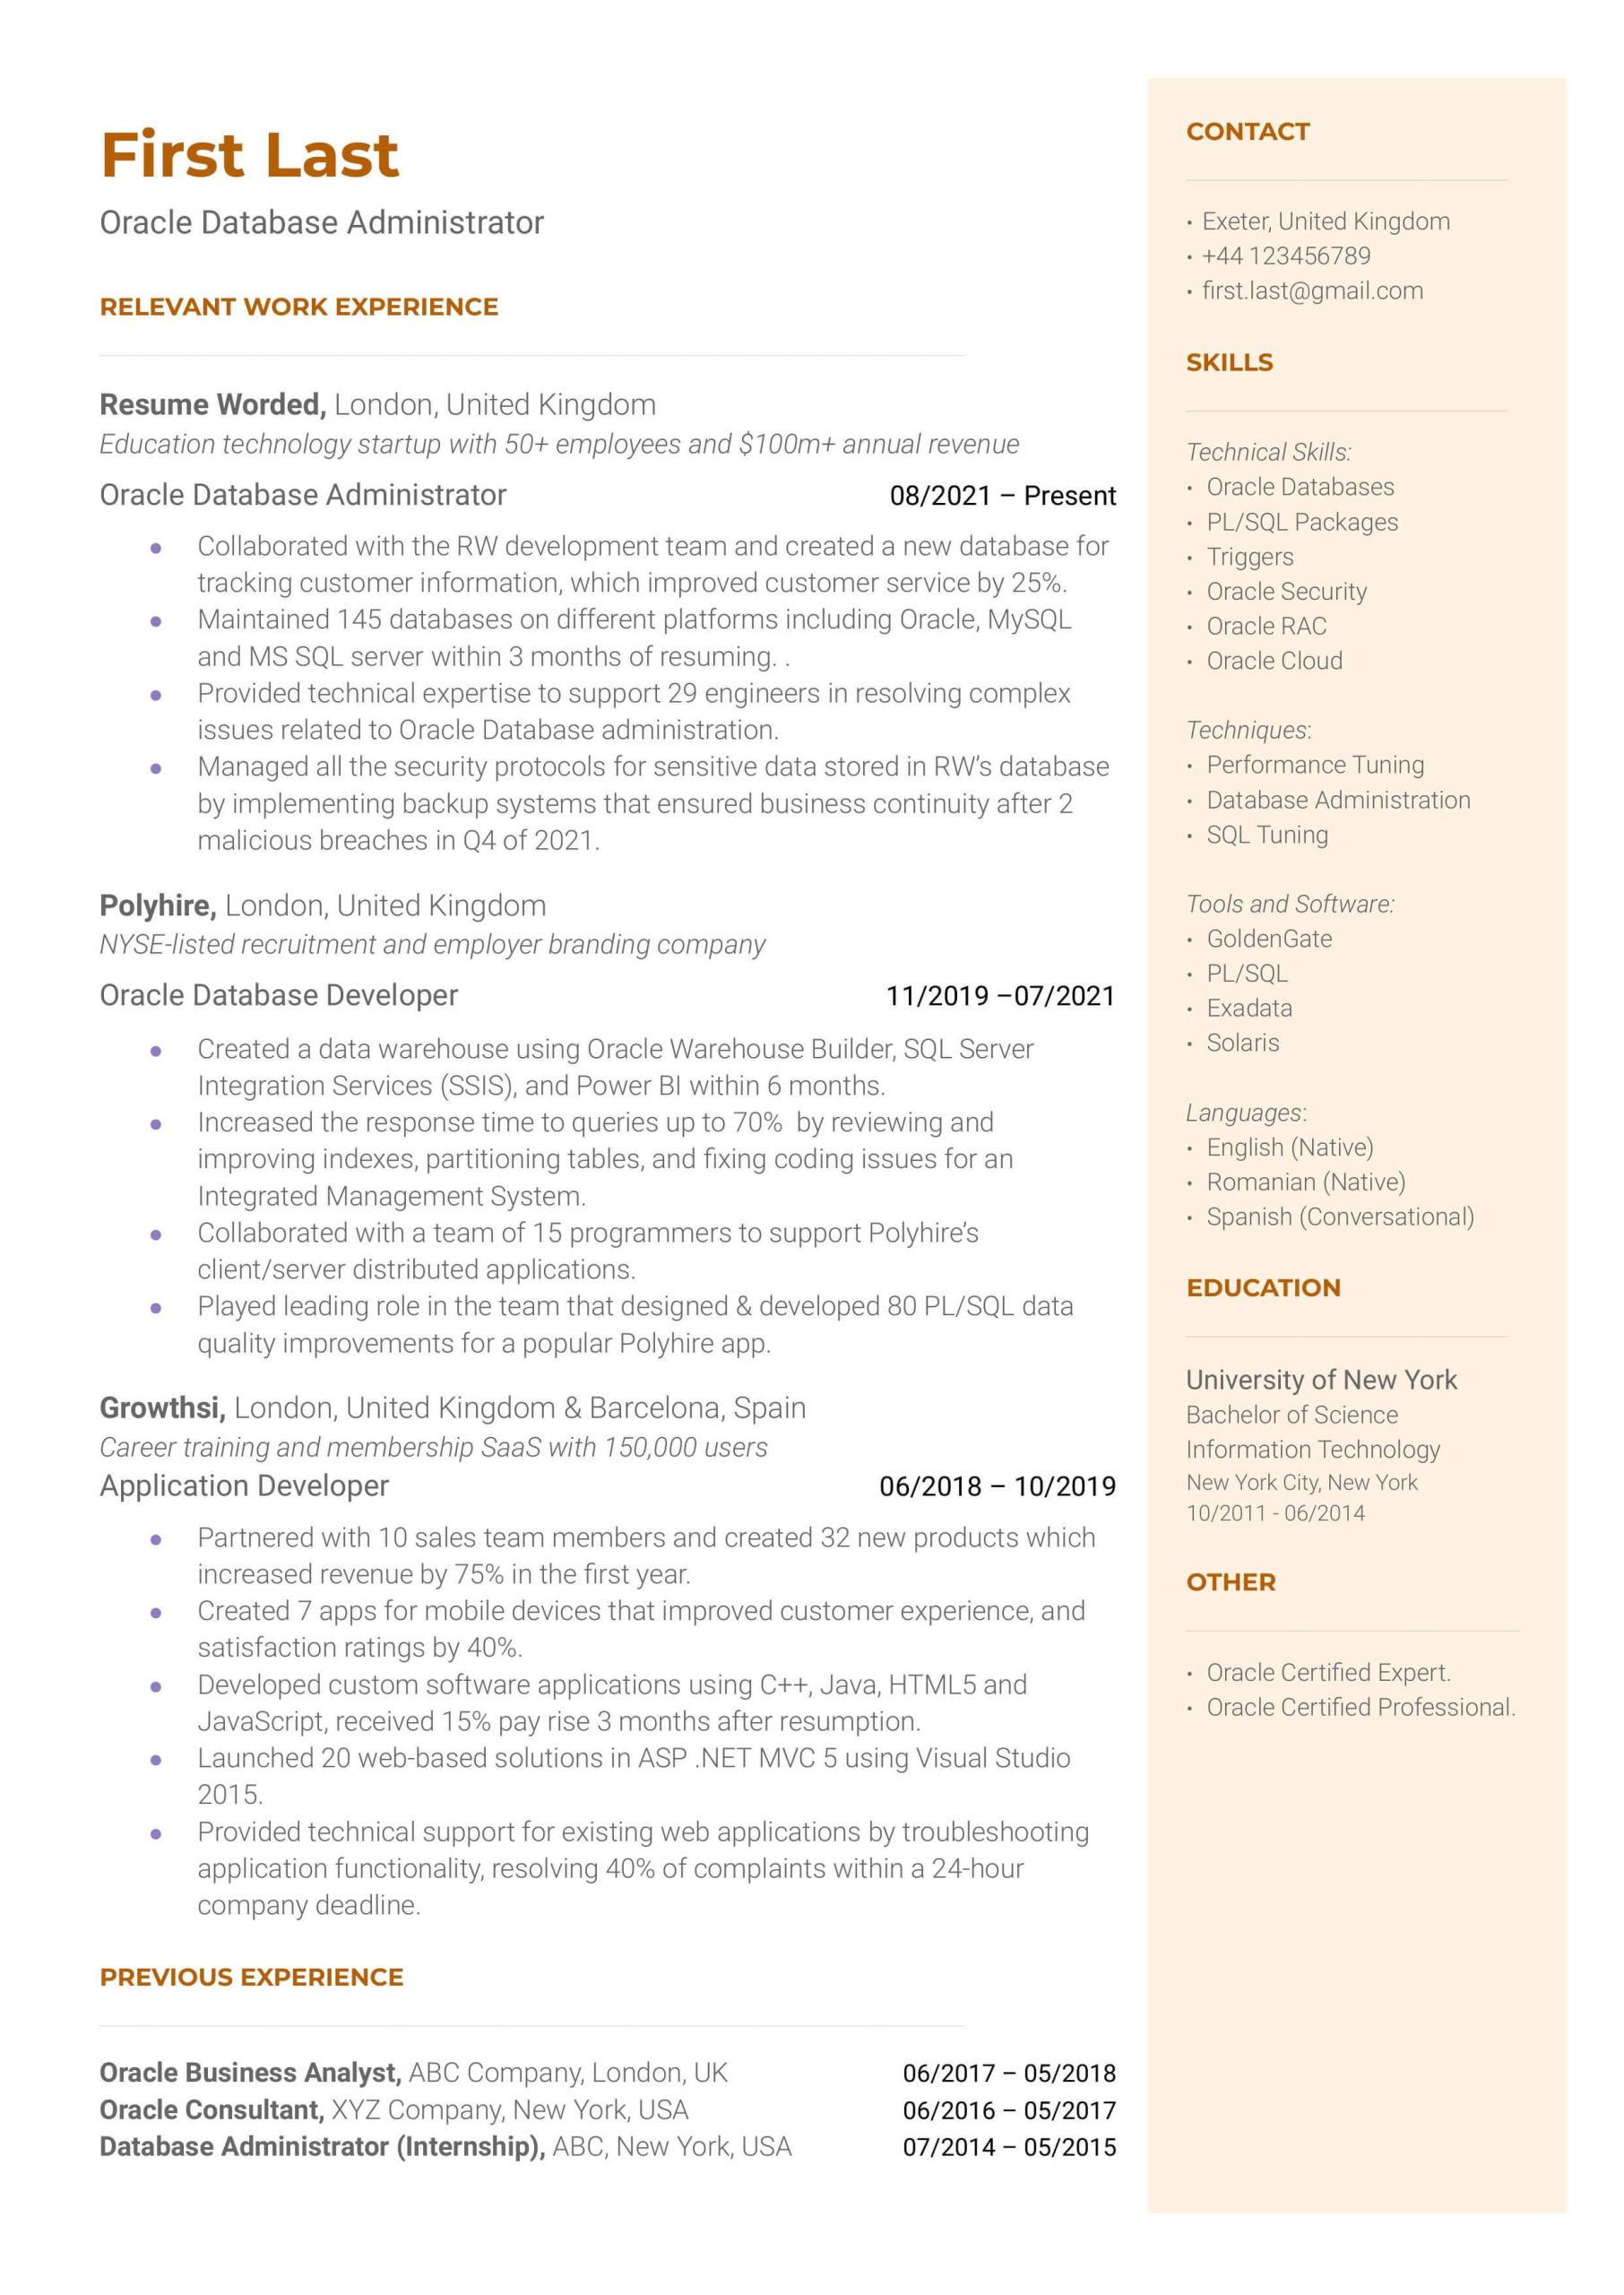 Oracle Dba Sample Resume for 4 Year Experience 3 oracle Resume Examples for 2022 Resume Worded